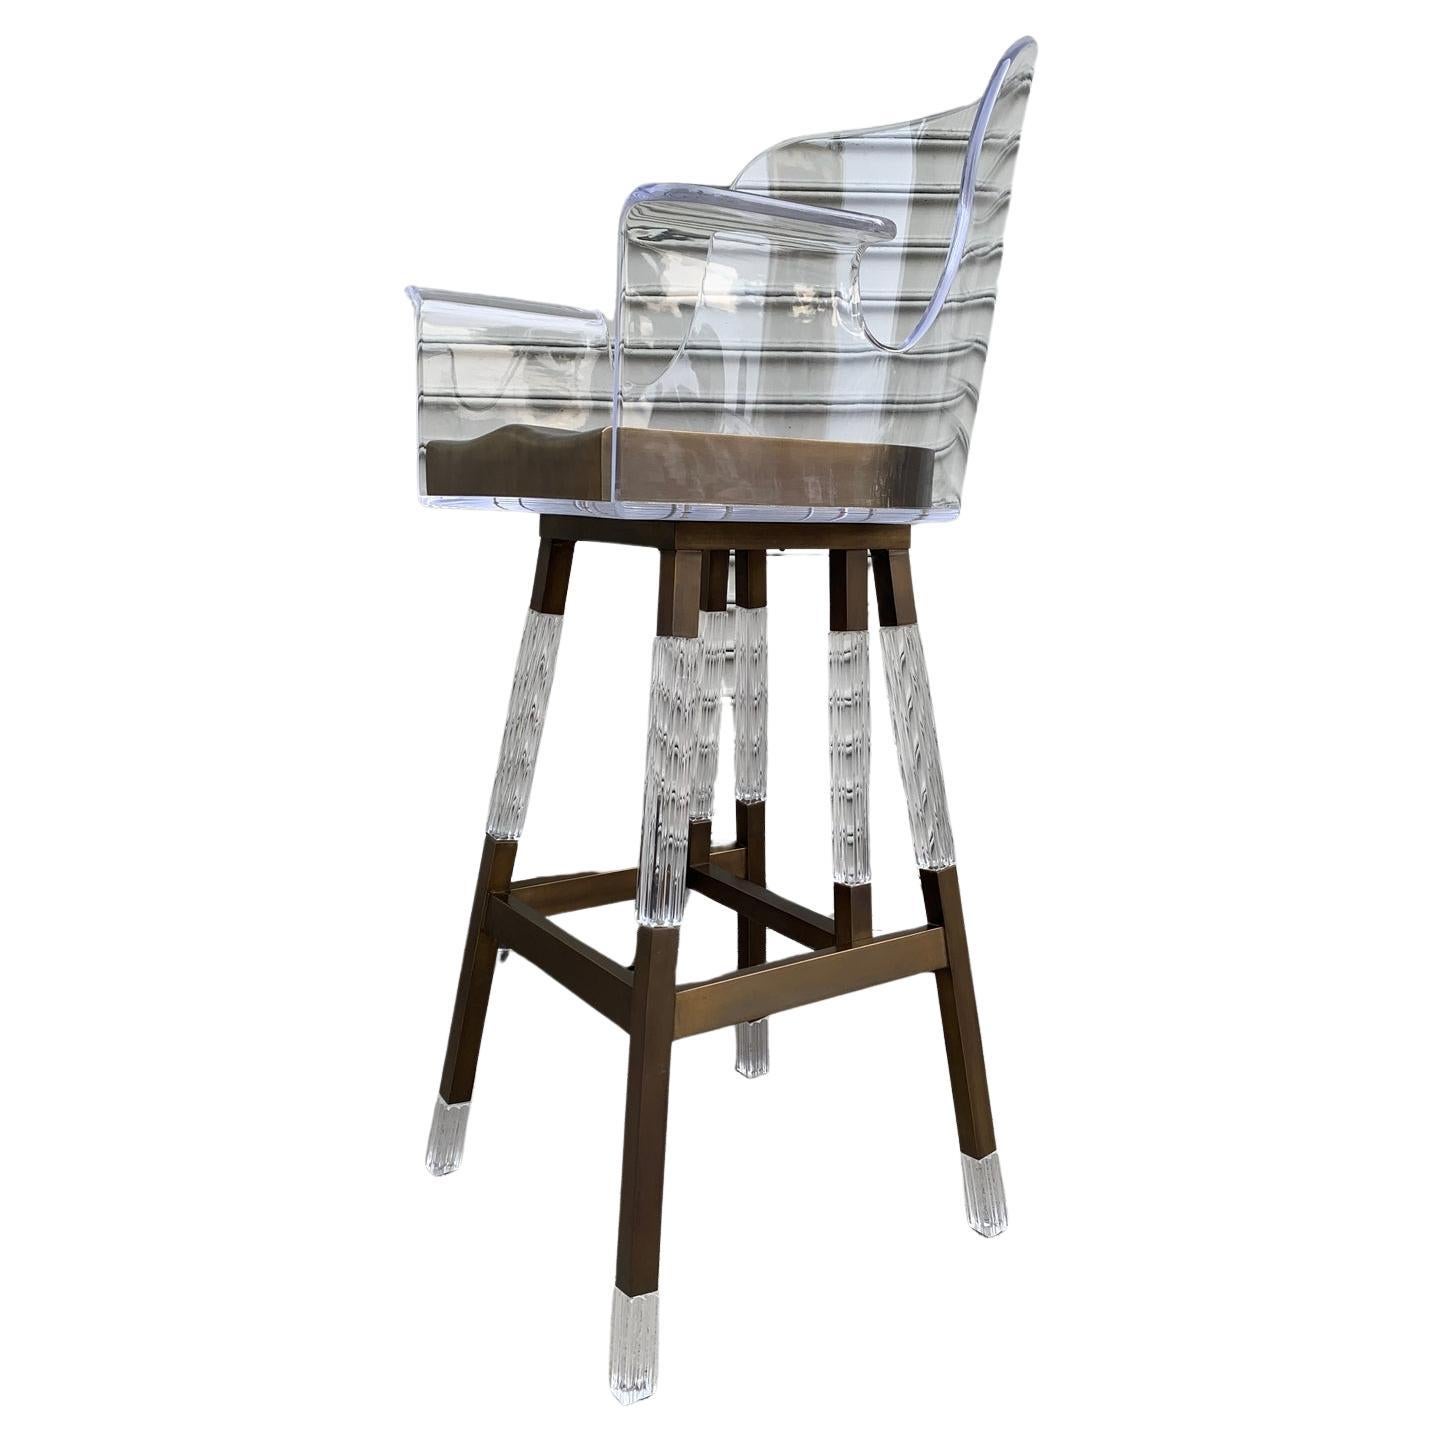 Stunning and beautiful barstool designed and manufactured by Amparo Calderon Tapia and part of the 